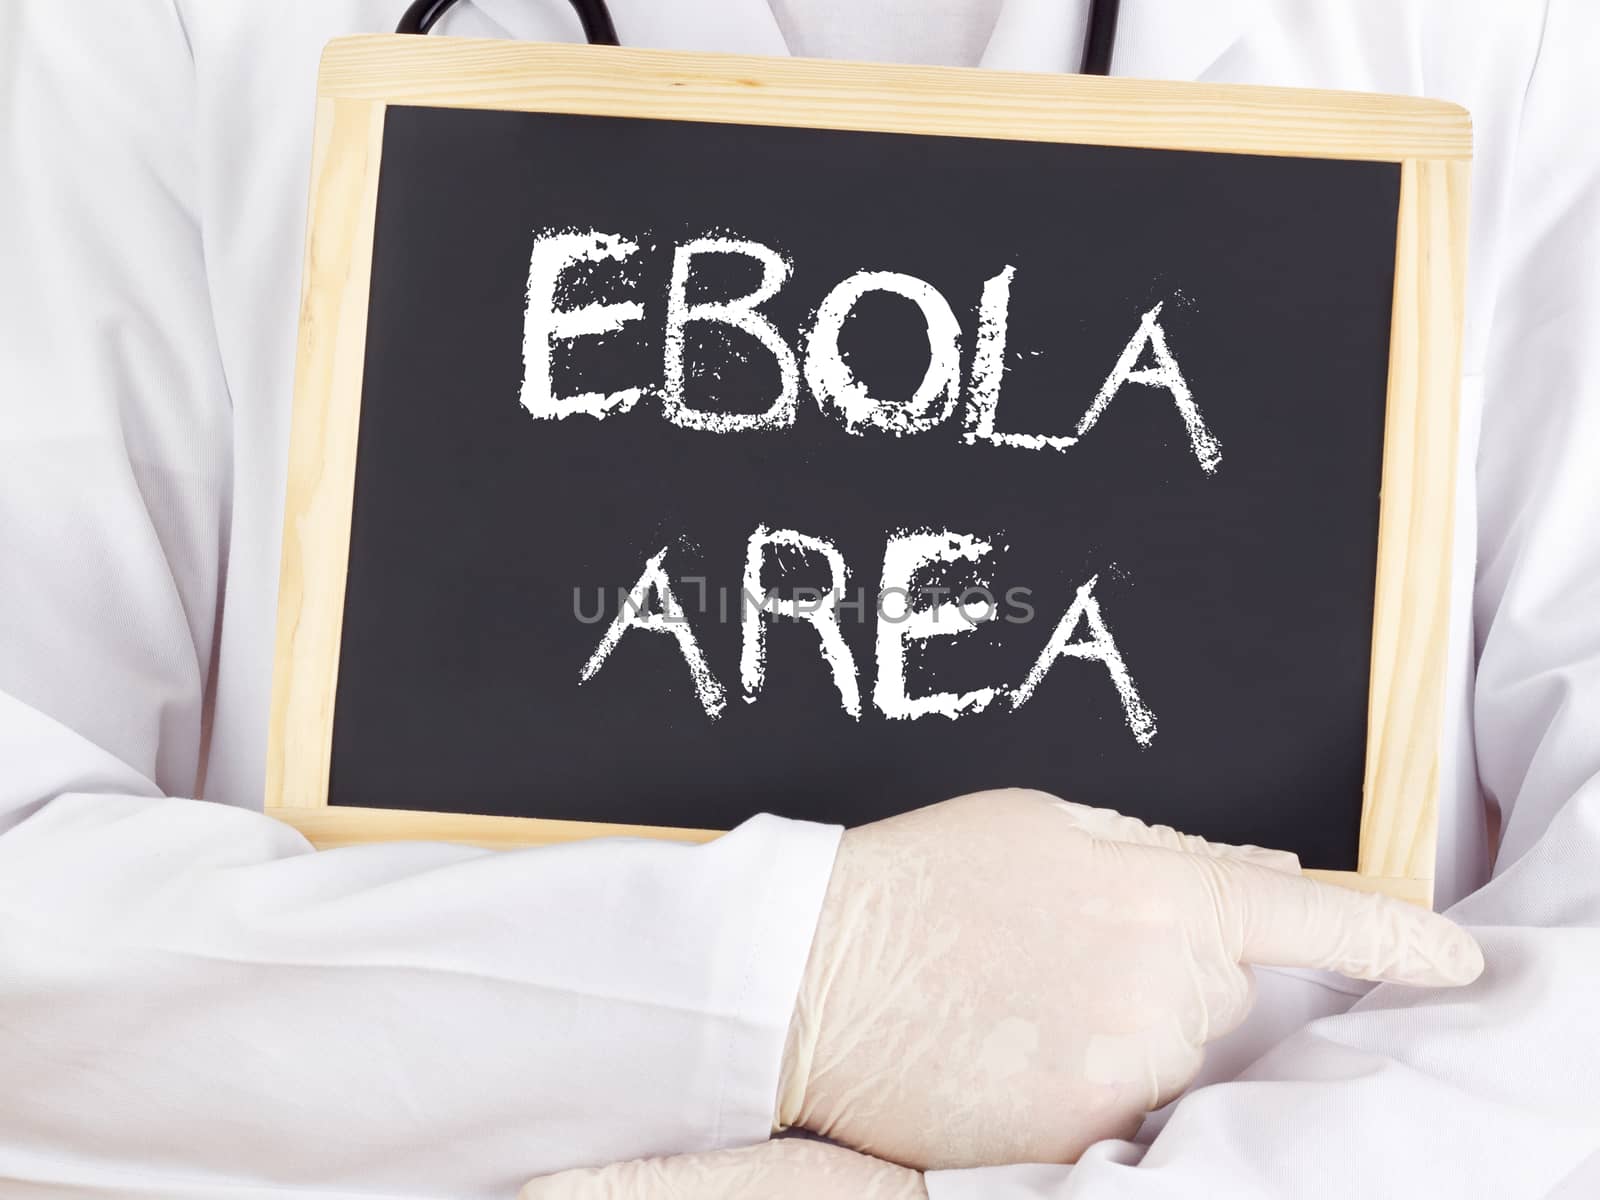 Doctor shows information: Ebola area by gwolters